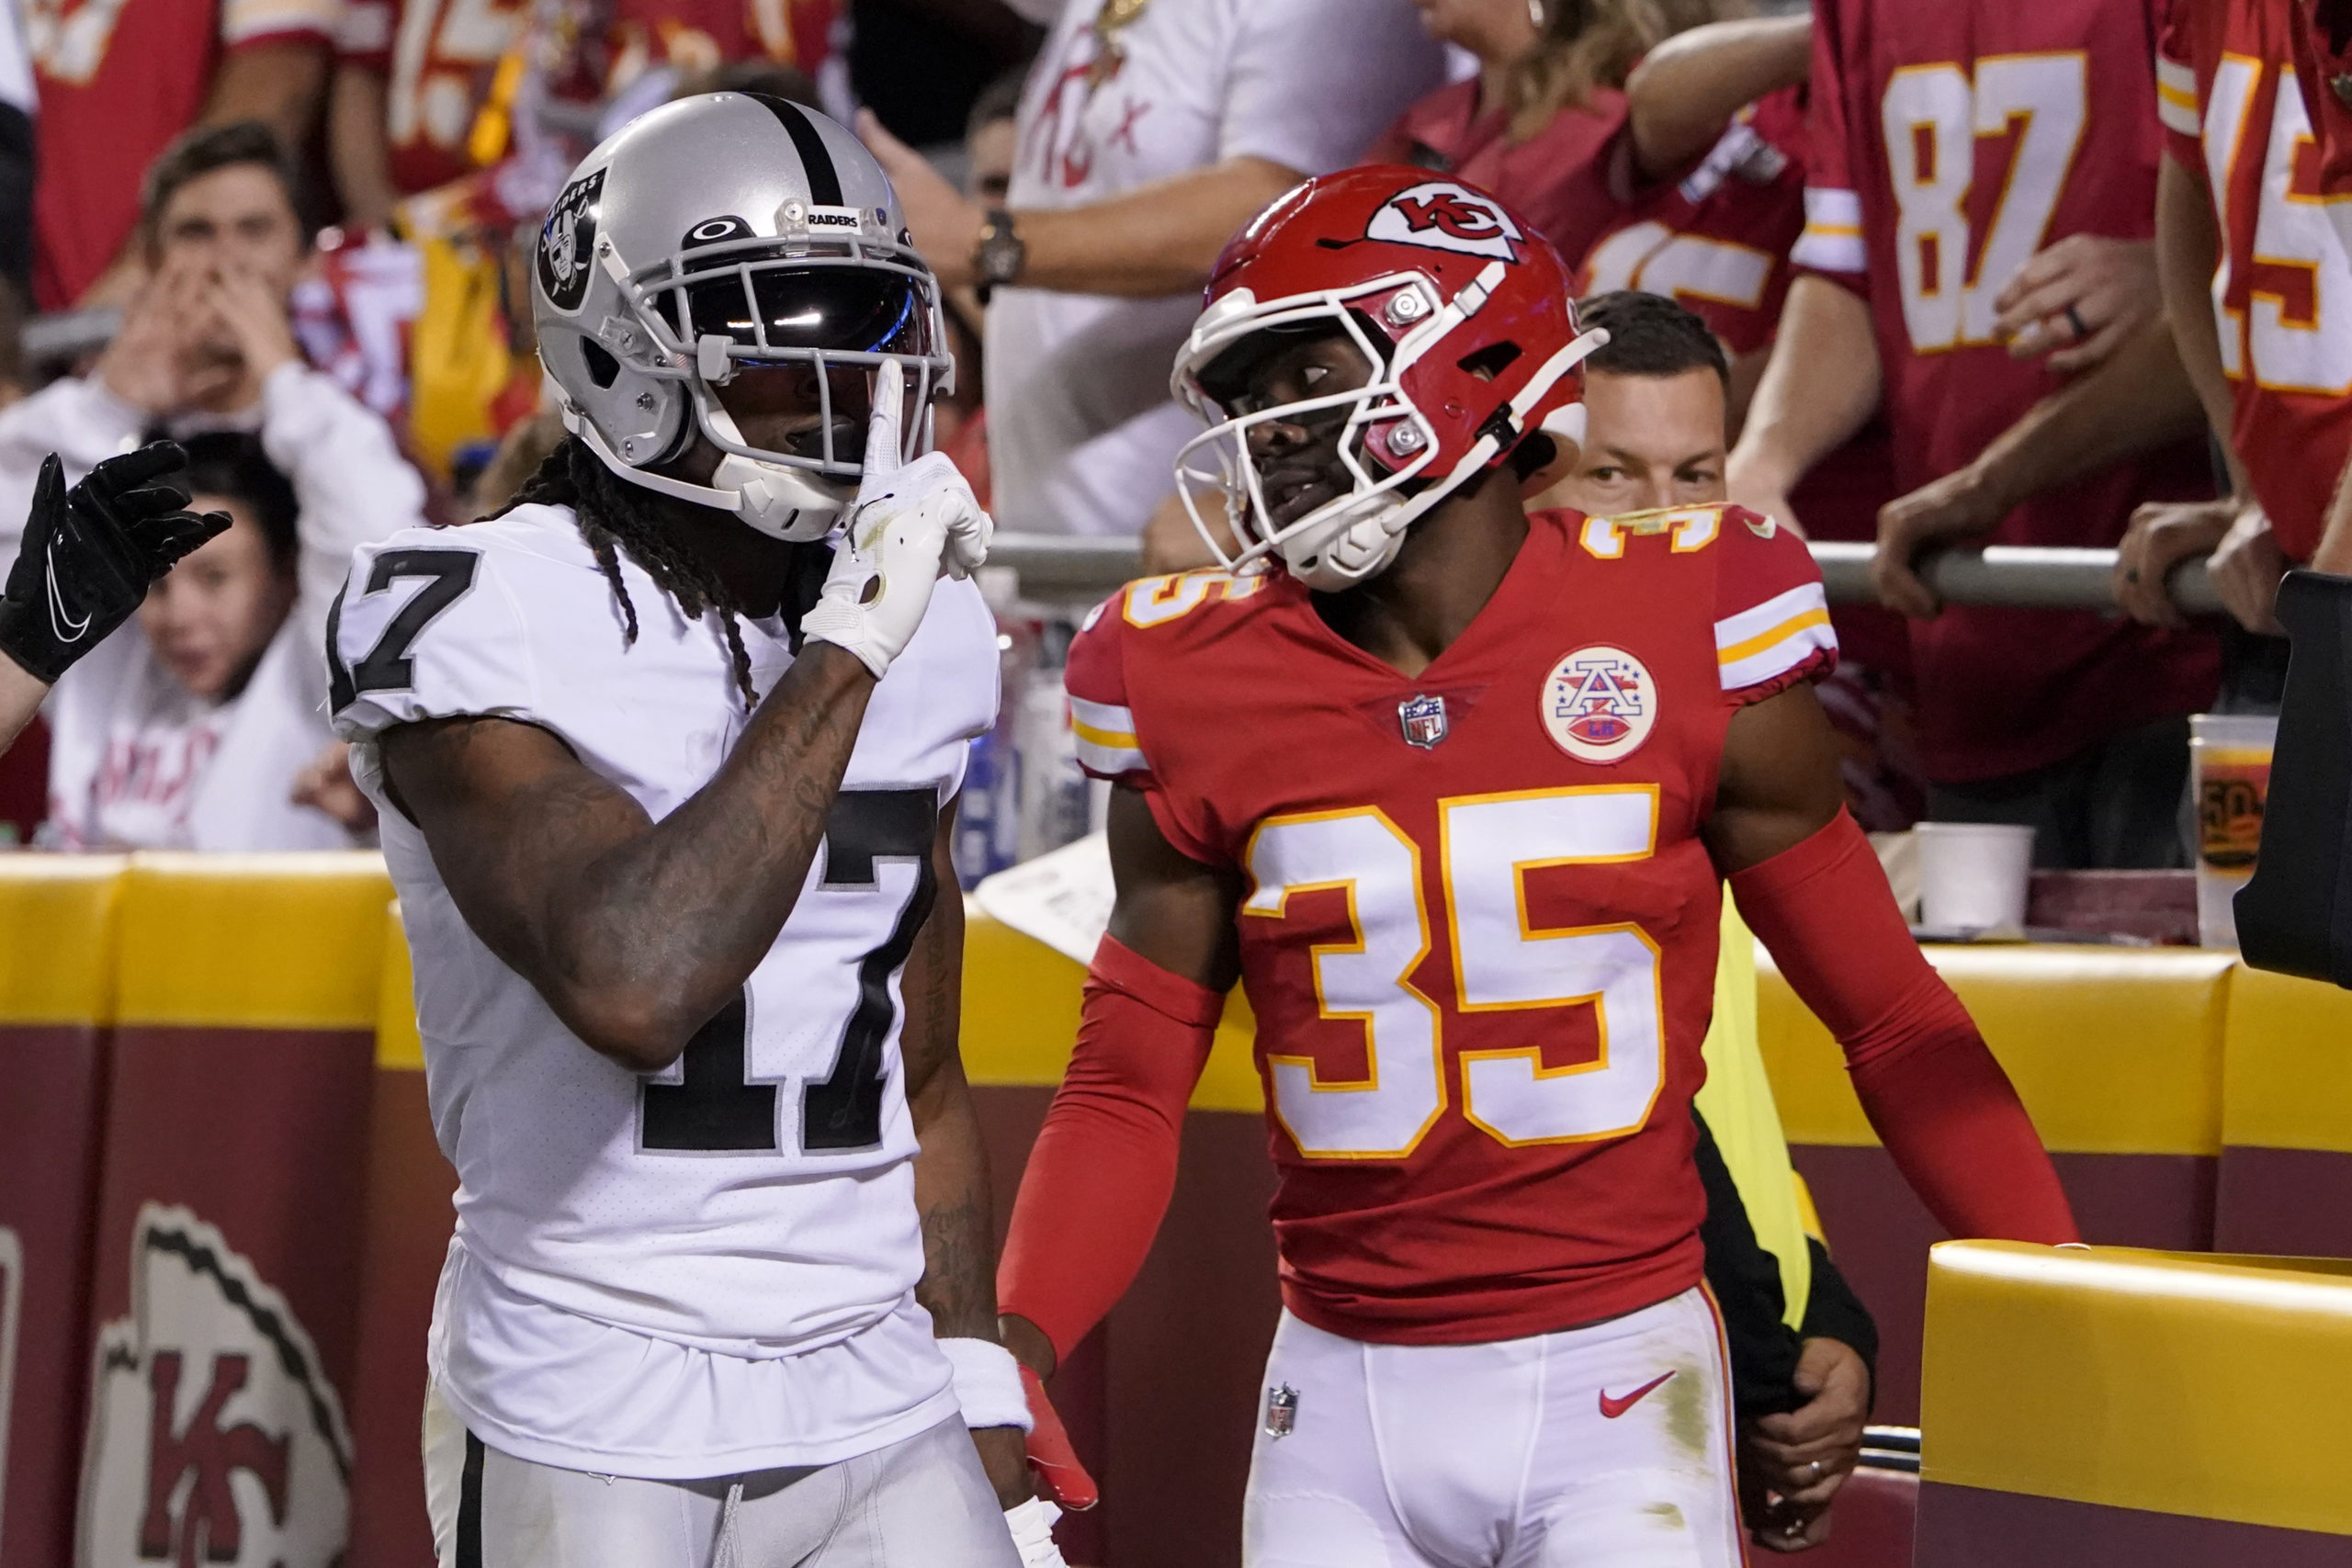 Davante Adams, left, celebrates scoring a touchdown against Jaylen Watson, right, on Monday night during the NFL Monday Night Football Game where the Las Vegas Raiders played the Kansas City Chiefs.